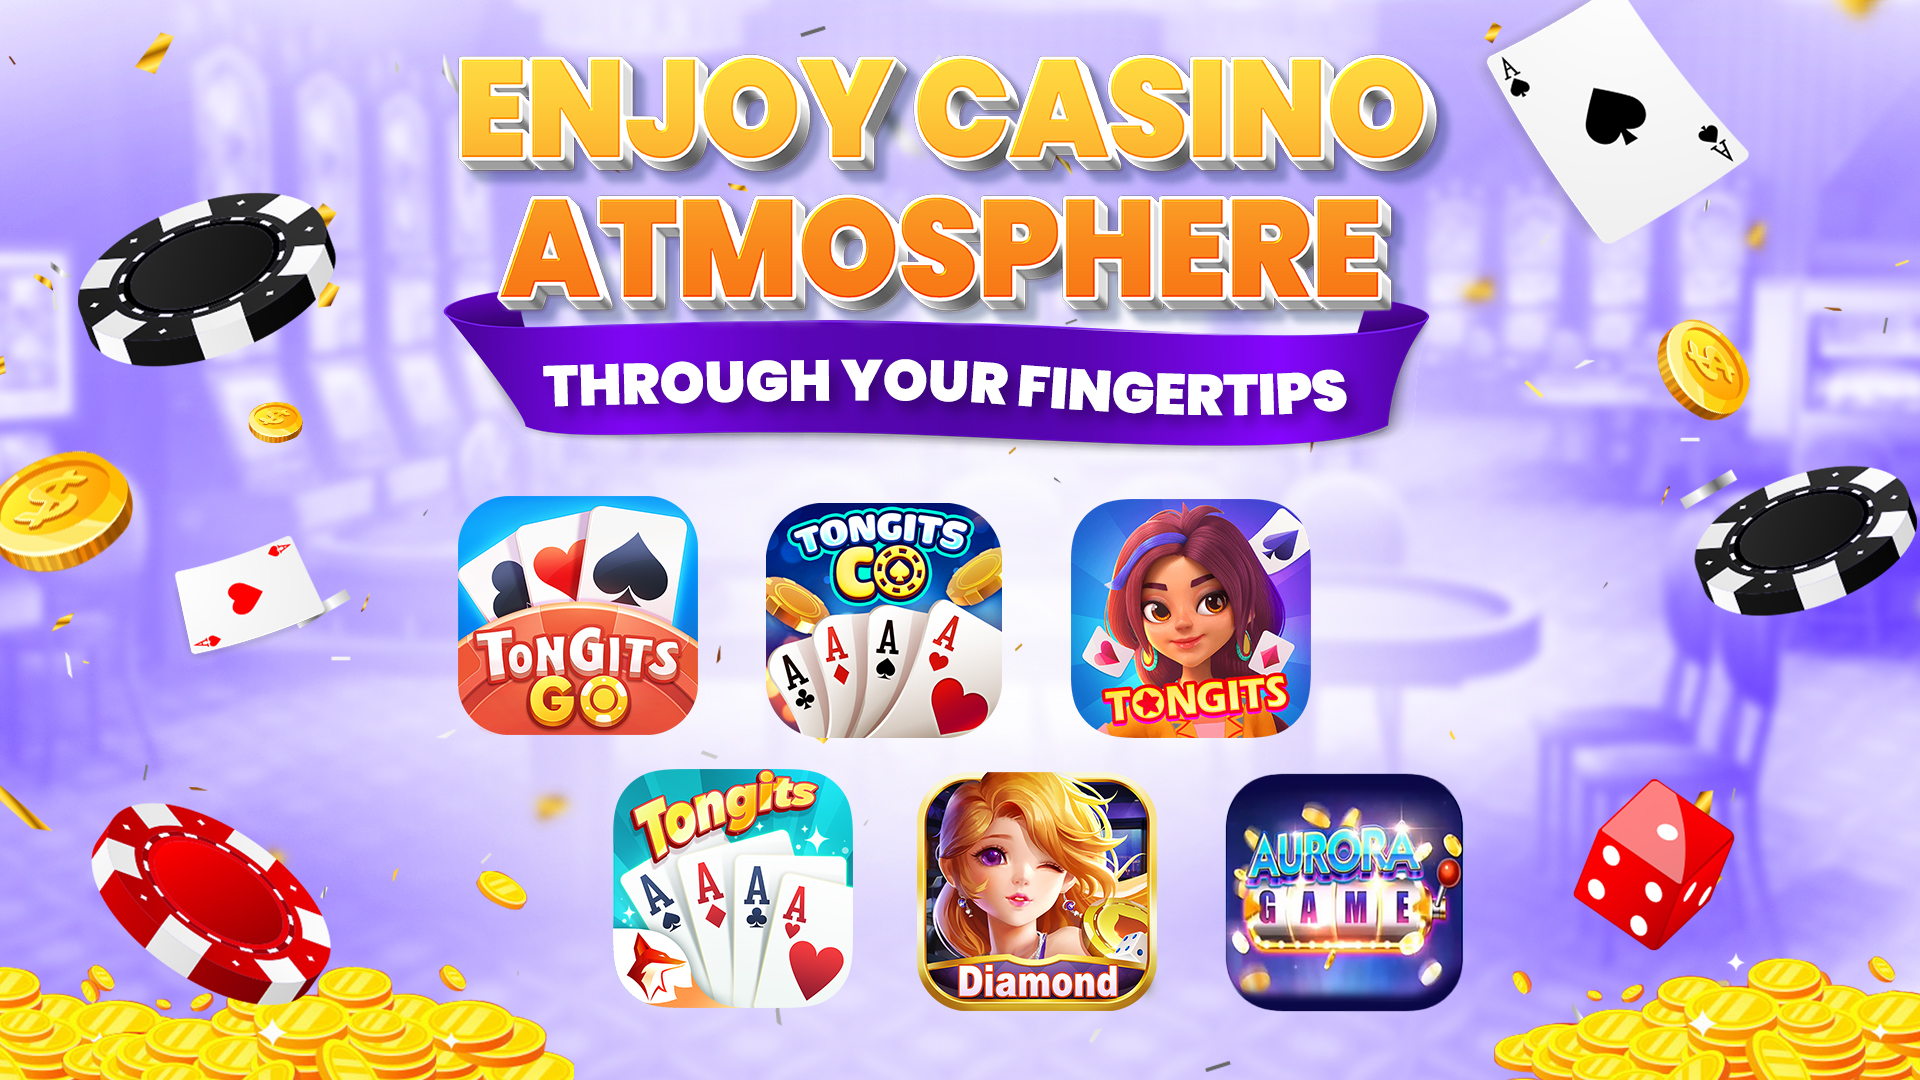 PHILIPPINES ONLINE CASINOS MUST KNOW FOR GCASH